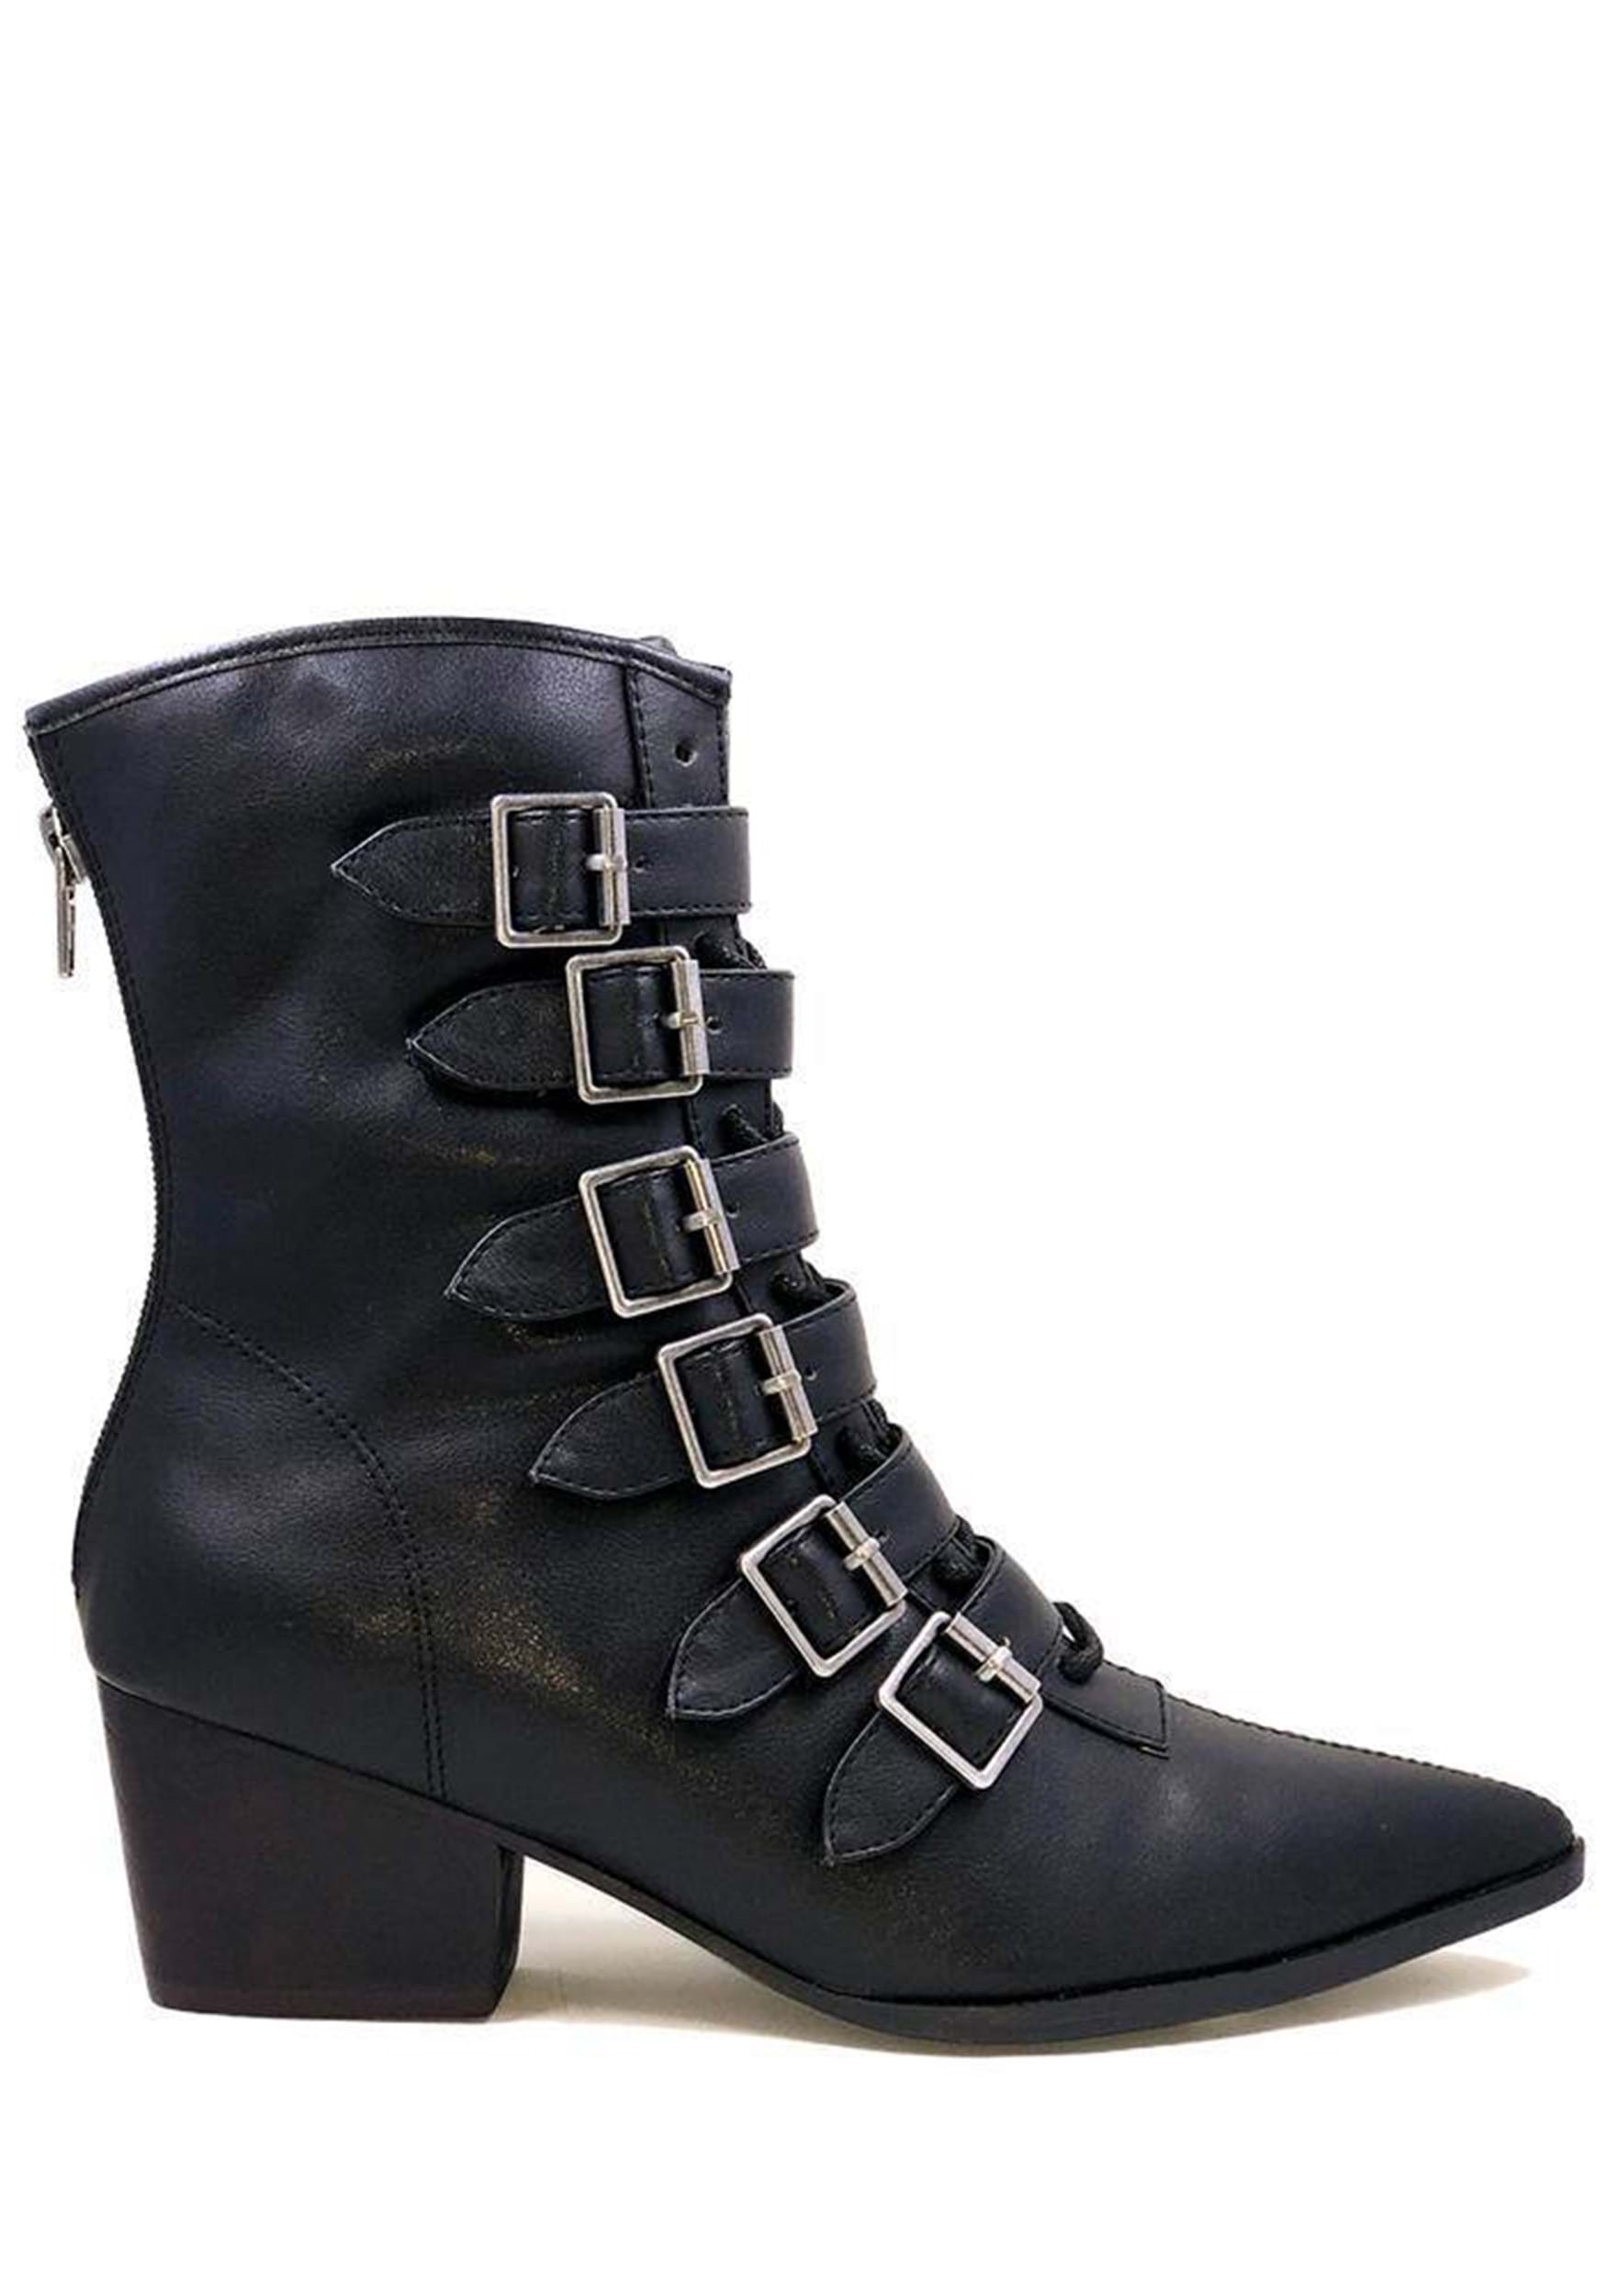 Image of Black Buckle Women's Boots ID SVCOVENBOOT-BK-10